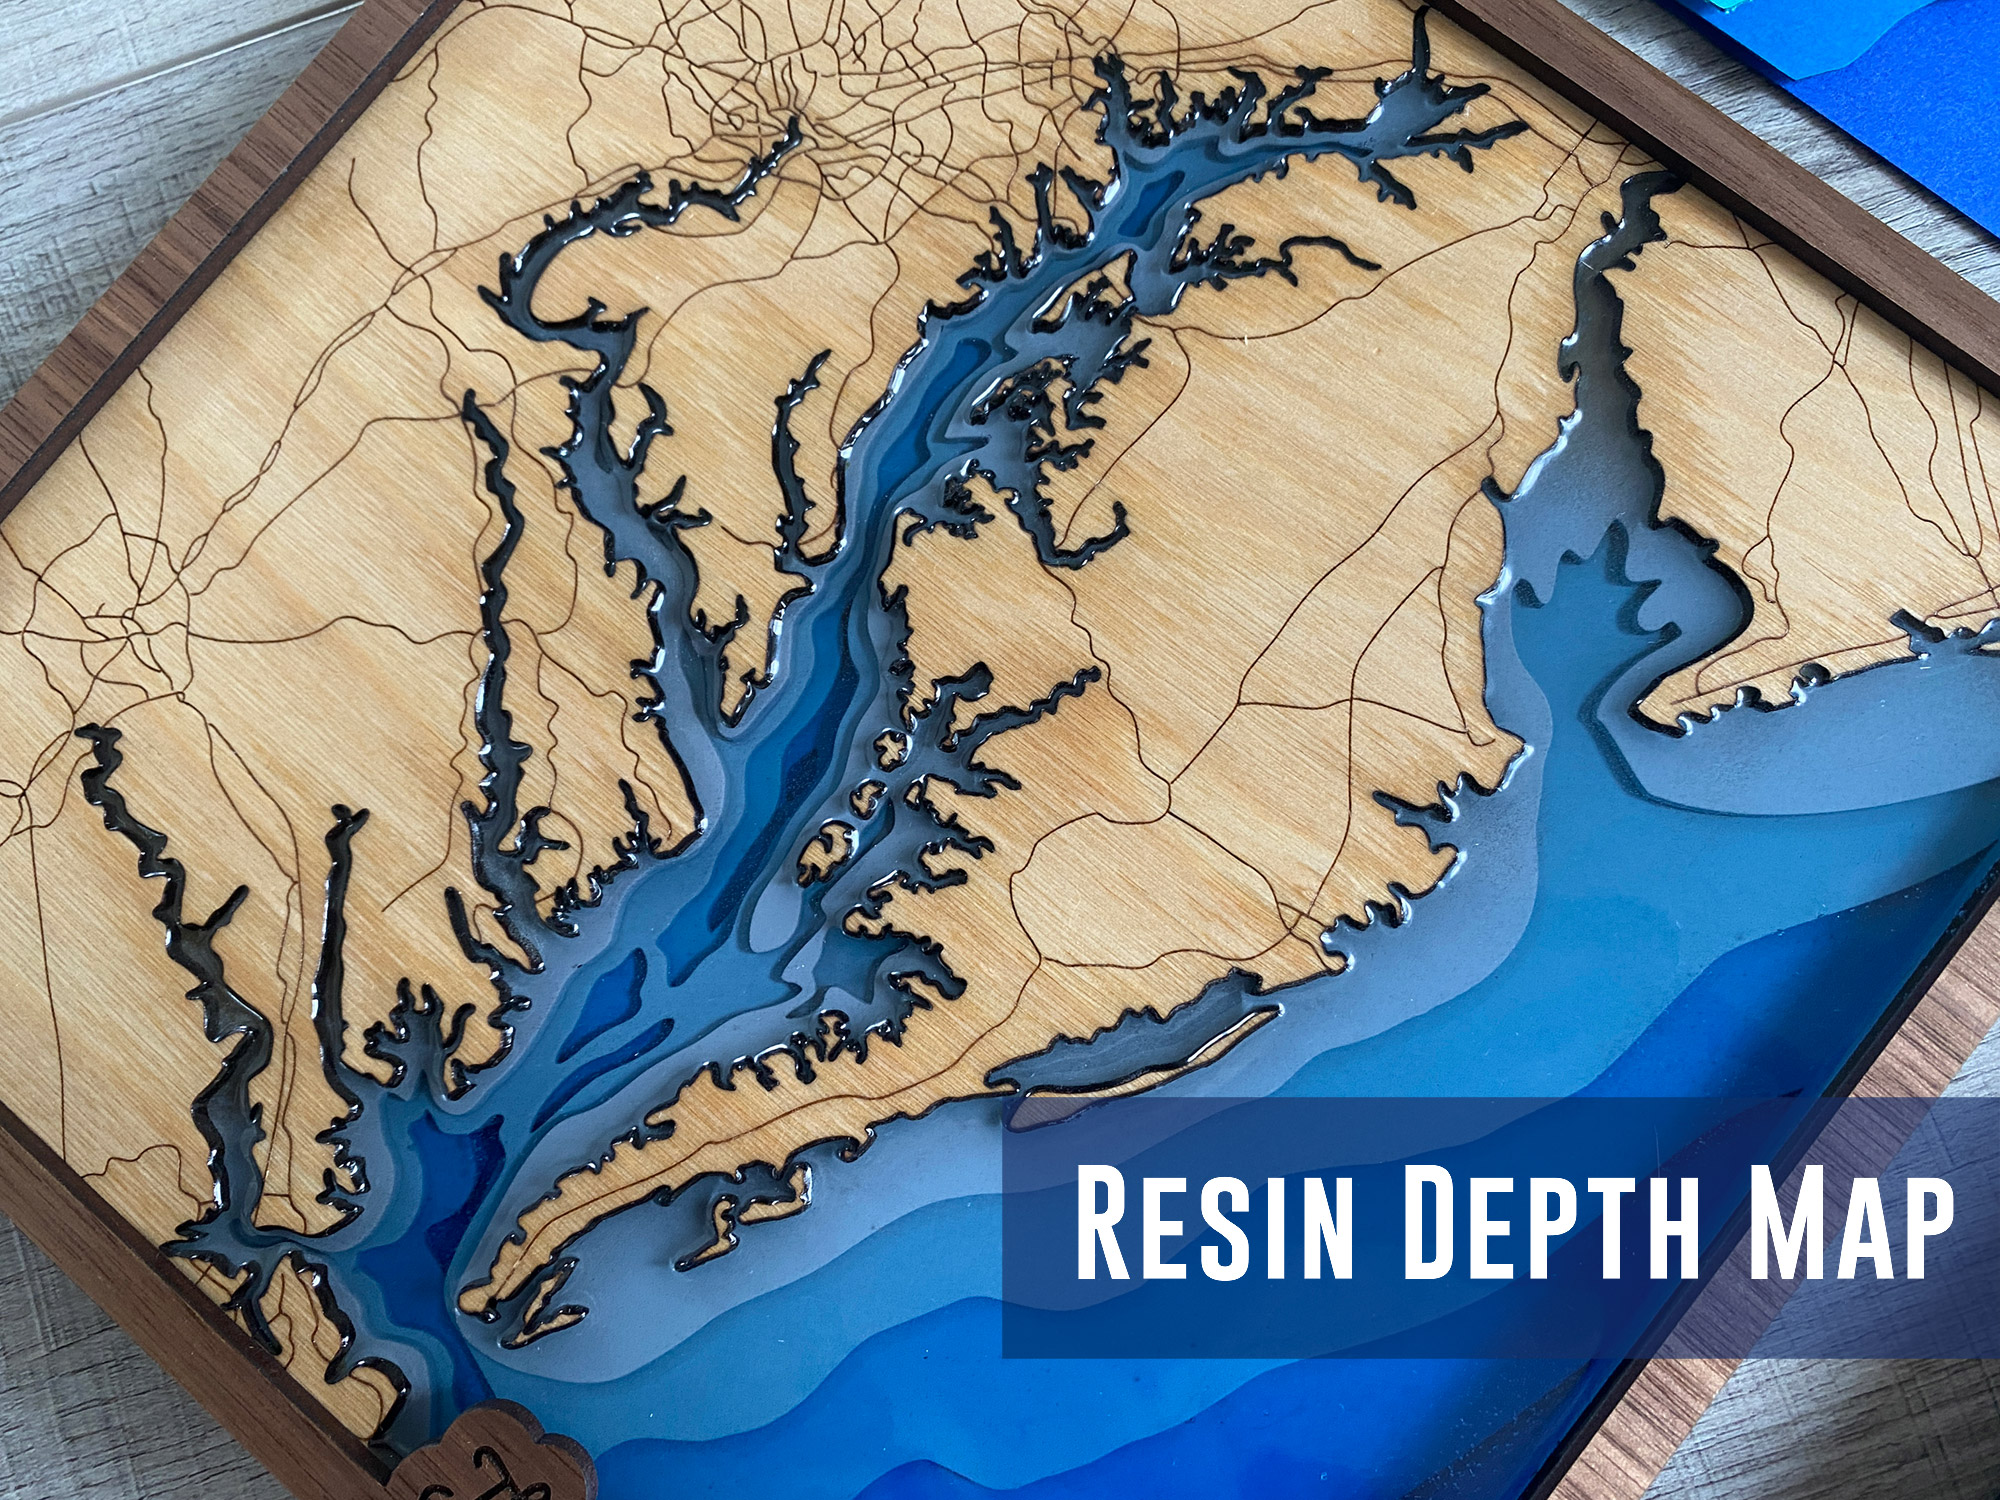 Creating a Resin Depth Map – Laser cutting a Map of The Chesapeake Bay